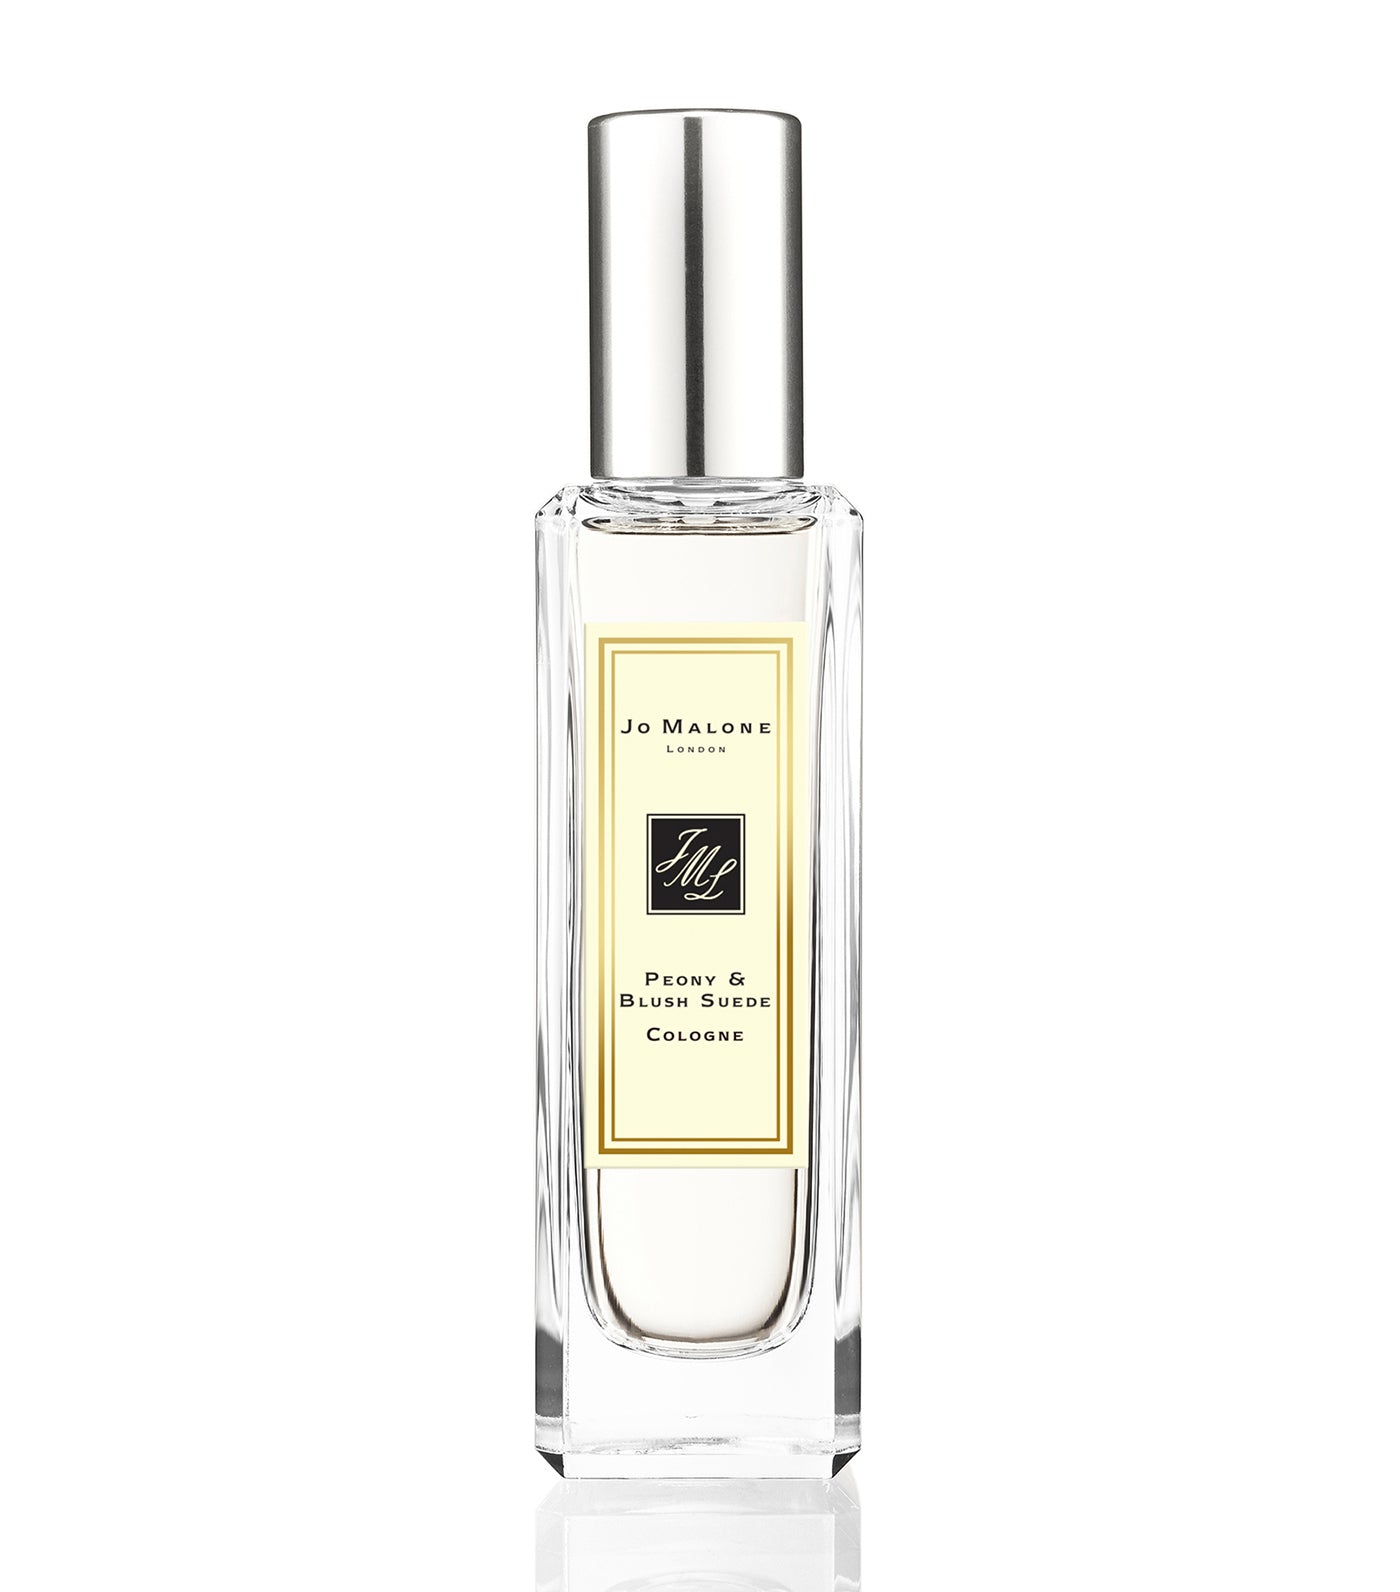 jo malone london 30 peony and blush suede cologne